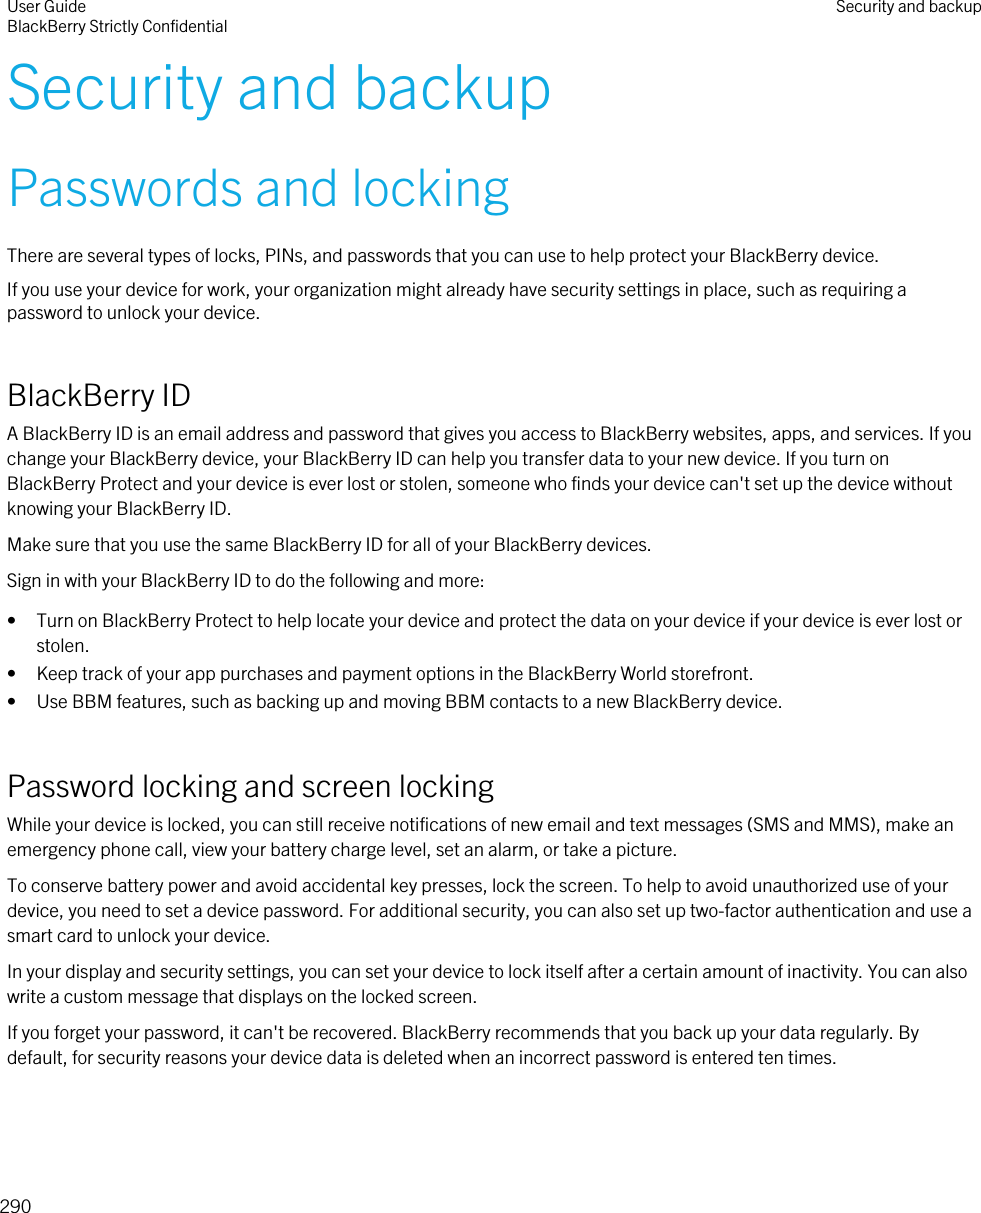 Security and backupPasswords and lockingThere are several types of locks, PINs, and passwords that you can use to help protect your BlackBerry device.If you use your device for work, your organization might already have security settings in place, such as requiring a password to unlock your device.BlackBerry IDA BlackBerry ID is an email address and password that gives you access to BlackBerry websites, apps, and services. If you change your BlackBerry device, your BlackBerry ID can help you transfer data to your new device. If you turn on BlackBerry Protect and your device is ever lost or stolen, someone who finds your device can&apos;t set up the device without knowing your BlackBerry ID.Make sure that you use the same BlackBerry ID for all of your BlackBerry devices.Sign in with your BlackBerry ID to do the following and more:• Turn on BlackBerry Protect to help locate your device and protect the data on your device if your device is ever lost or stolen.• Keep track of your app purchases and payment options in the BlackBerry World storefront.• Use BBM features, such as backing up and moving BBM contacts to a new BlackBerry device.Password locking and screen lockingWhile your device is locked, you can still receive notifications of new email and text messages (SMS and MMS), make an emergency phone call, view your battery charge level, set an alarm, or take a picture.To conserve battery power and avoid accidental key presses, lock the screen. To help to avoid unauthorized use of your device, you need to set a device password. For additional security, you can also set up two-factor authentication and use a smart card to unlock your device.In your display and security settings, you can set your device to lock itself after a certain amount of inactivity. You can also write a custom message that displays on the locked screen.If you forget your password, it can&apos;t be recovered. BlackBerry recommends that you back up your data regularly. By default, for security reasons your device data is deleted when an incorrect password is entered ten times.User GuideBlackBerry Strictly Confidential Security and backup290